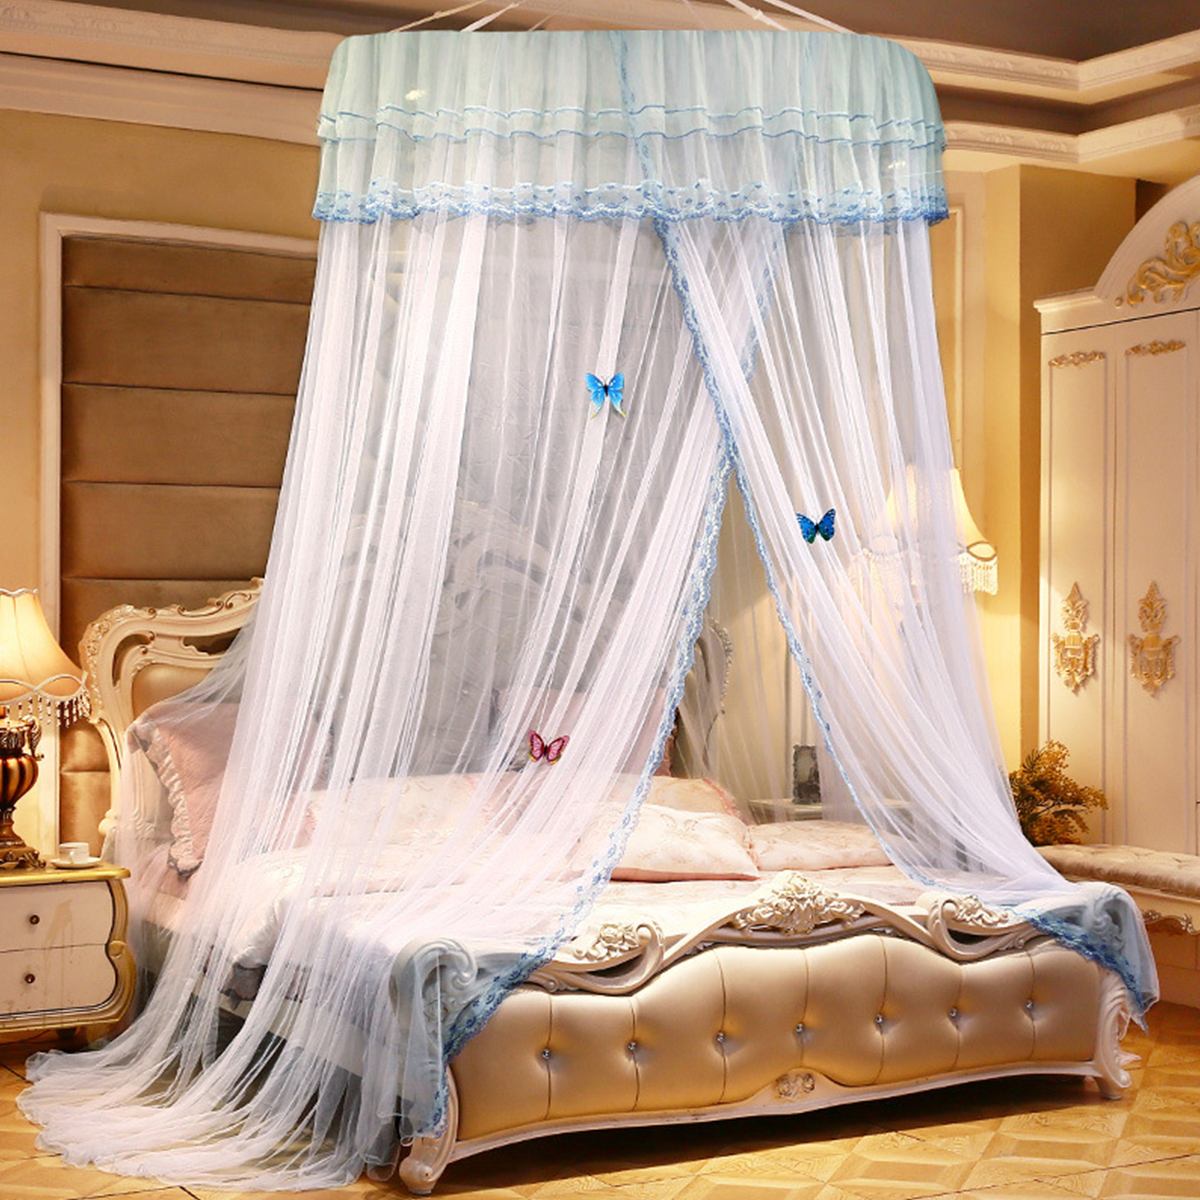 Dome Princess Mosquito Net Netting Mesh Bedding Canopy Tent Curtain Bed Room US